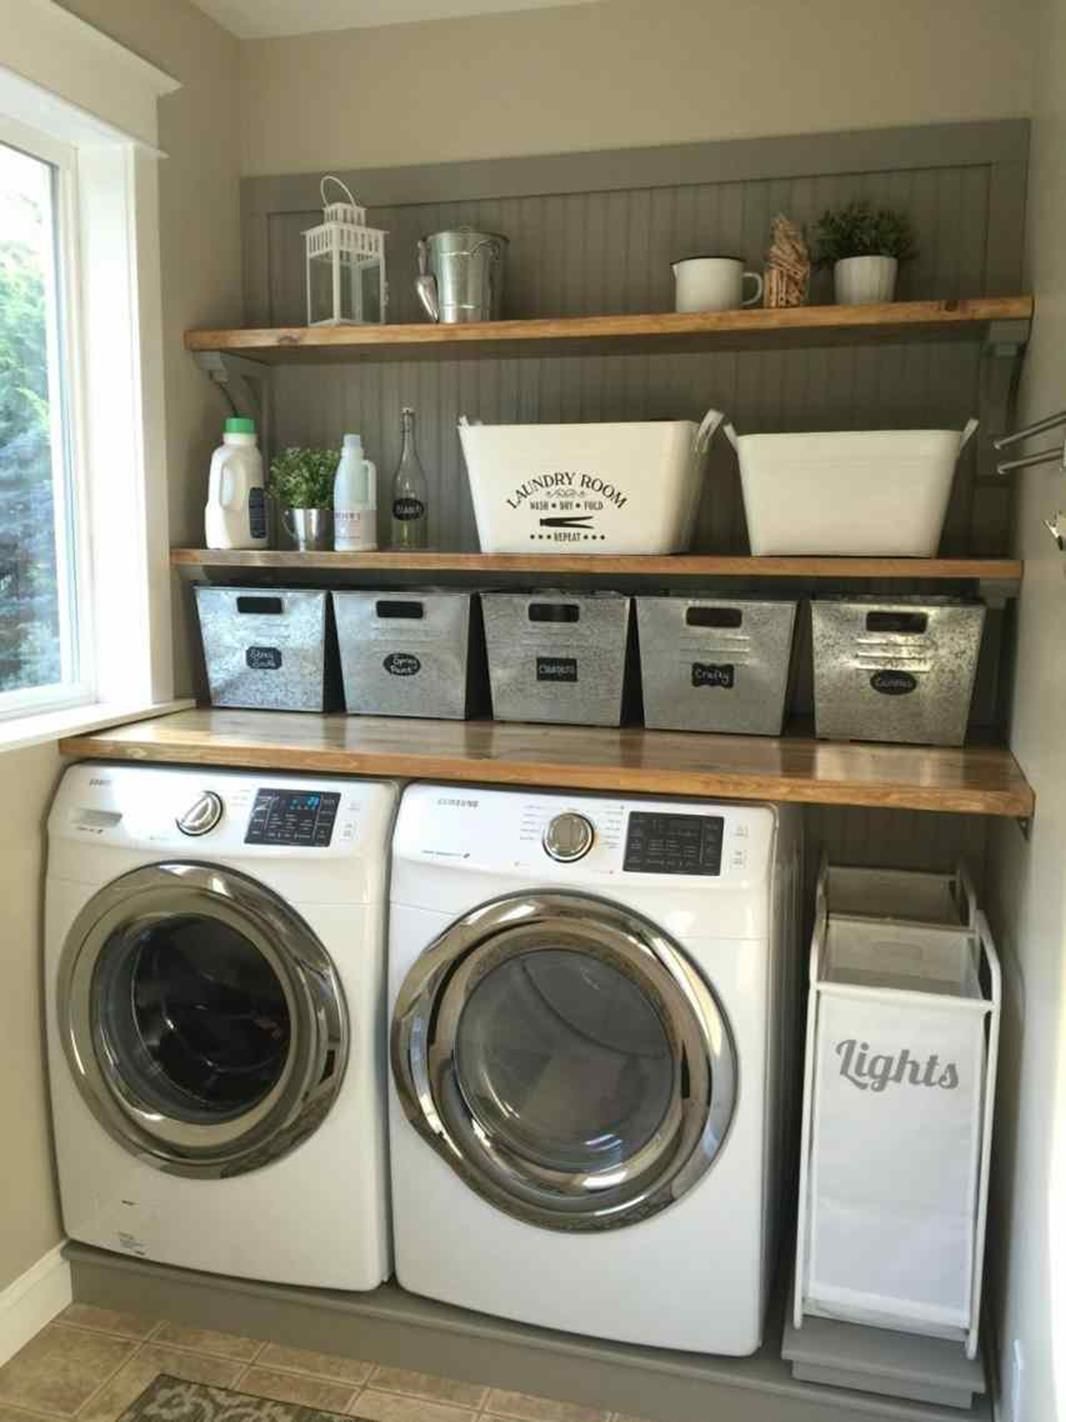 52 Laundry Room Design Ideas that Will Maximize your Small Space - GODIYGO.COM